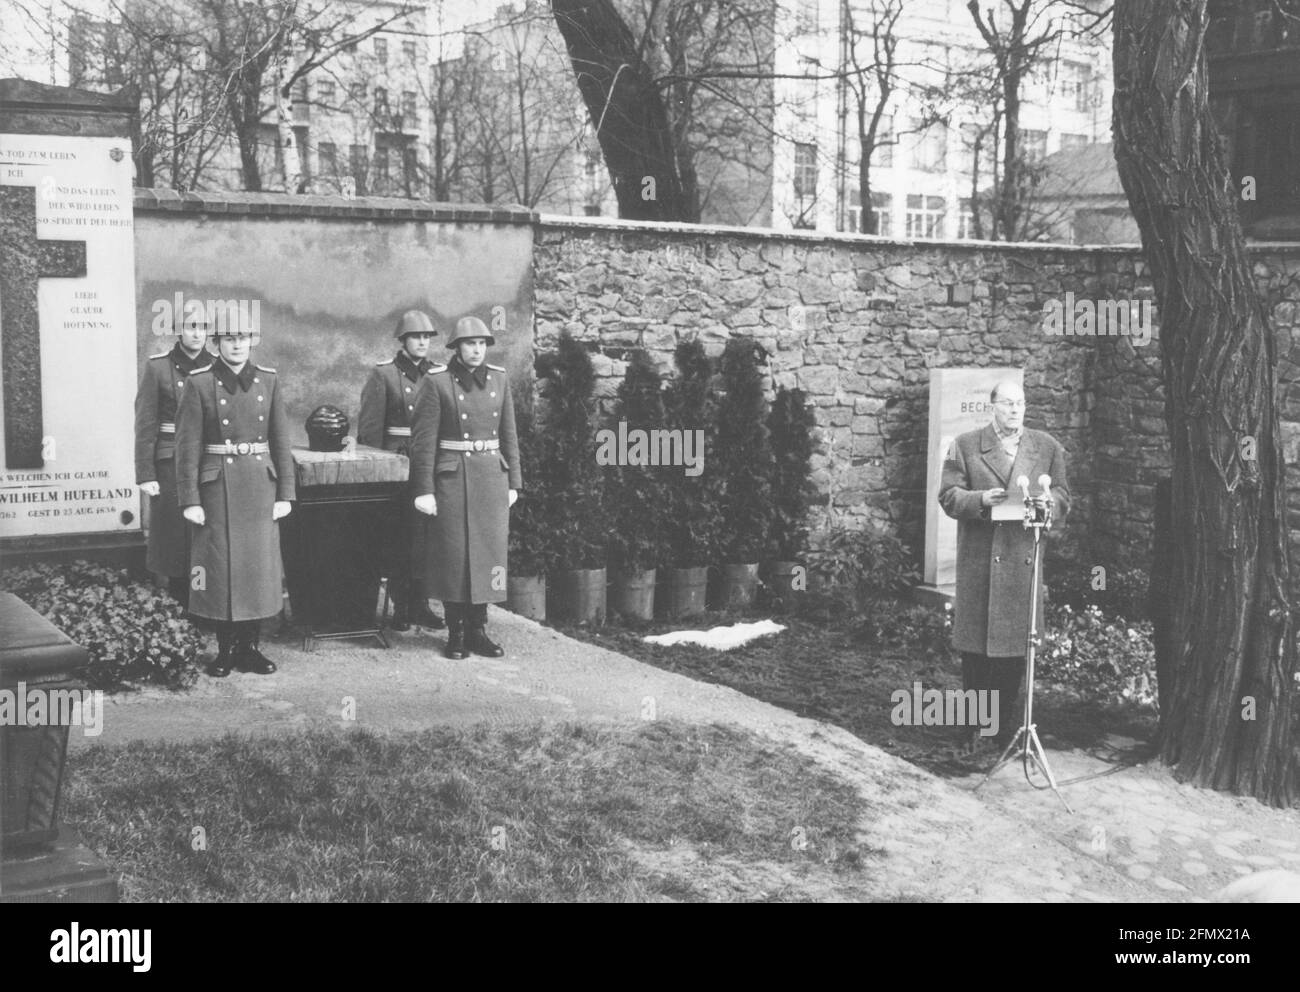 Mann, Heinrich, 27.3.1871 - 12.3.1950, German author / writer, his funeral, ADDITIONAL-RIGHTS-CLEARANCE-INFO-NOT-AVAILABLE Stock Photo